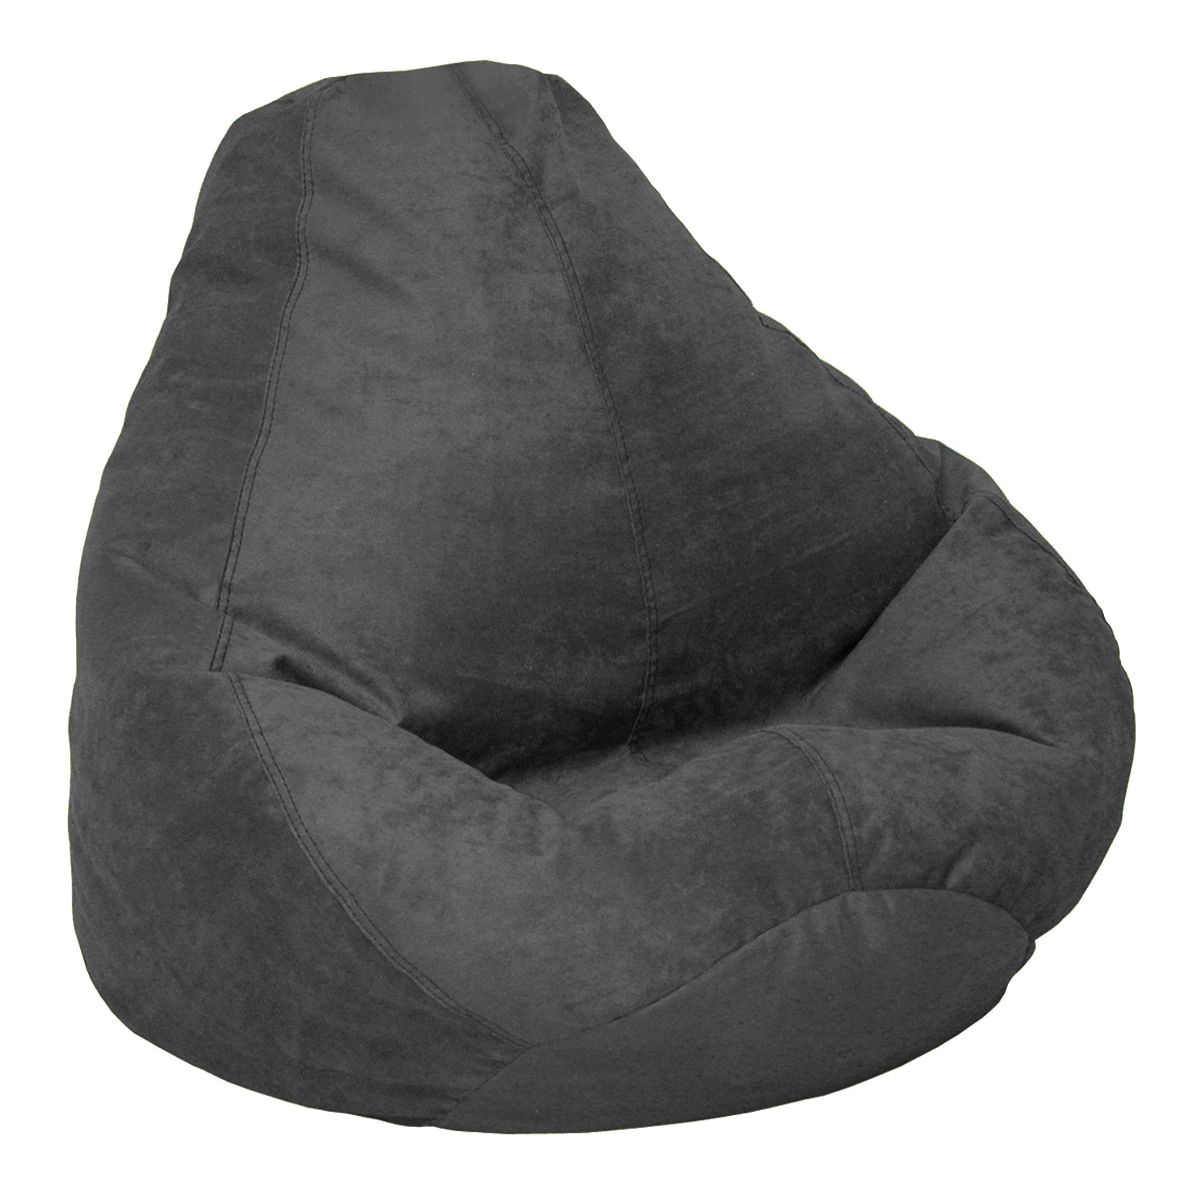 Beanbag Chairs for Kids soft Suede Extra Large Bean Bag Onyx Onyx Beige Size Jumbo